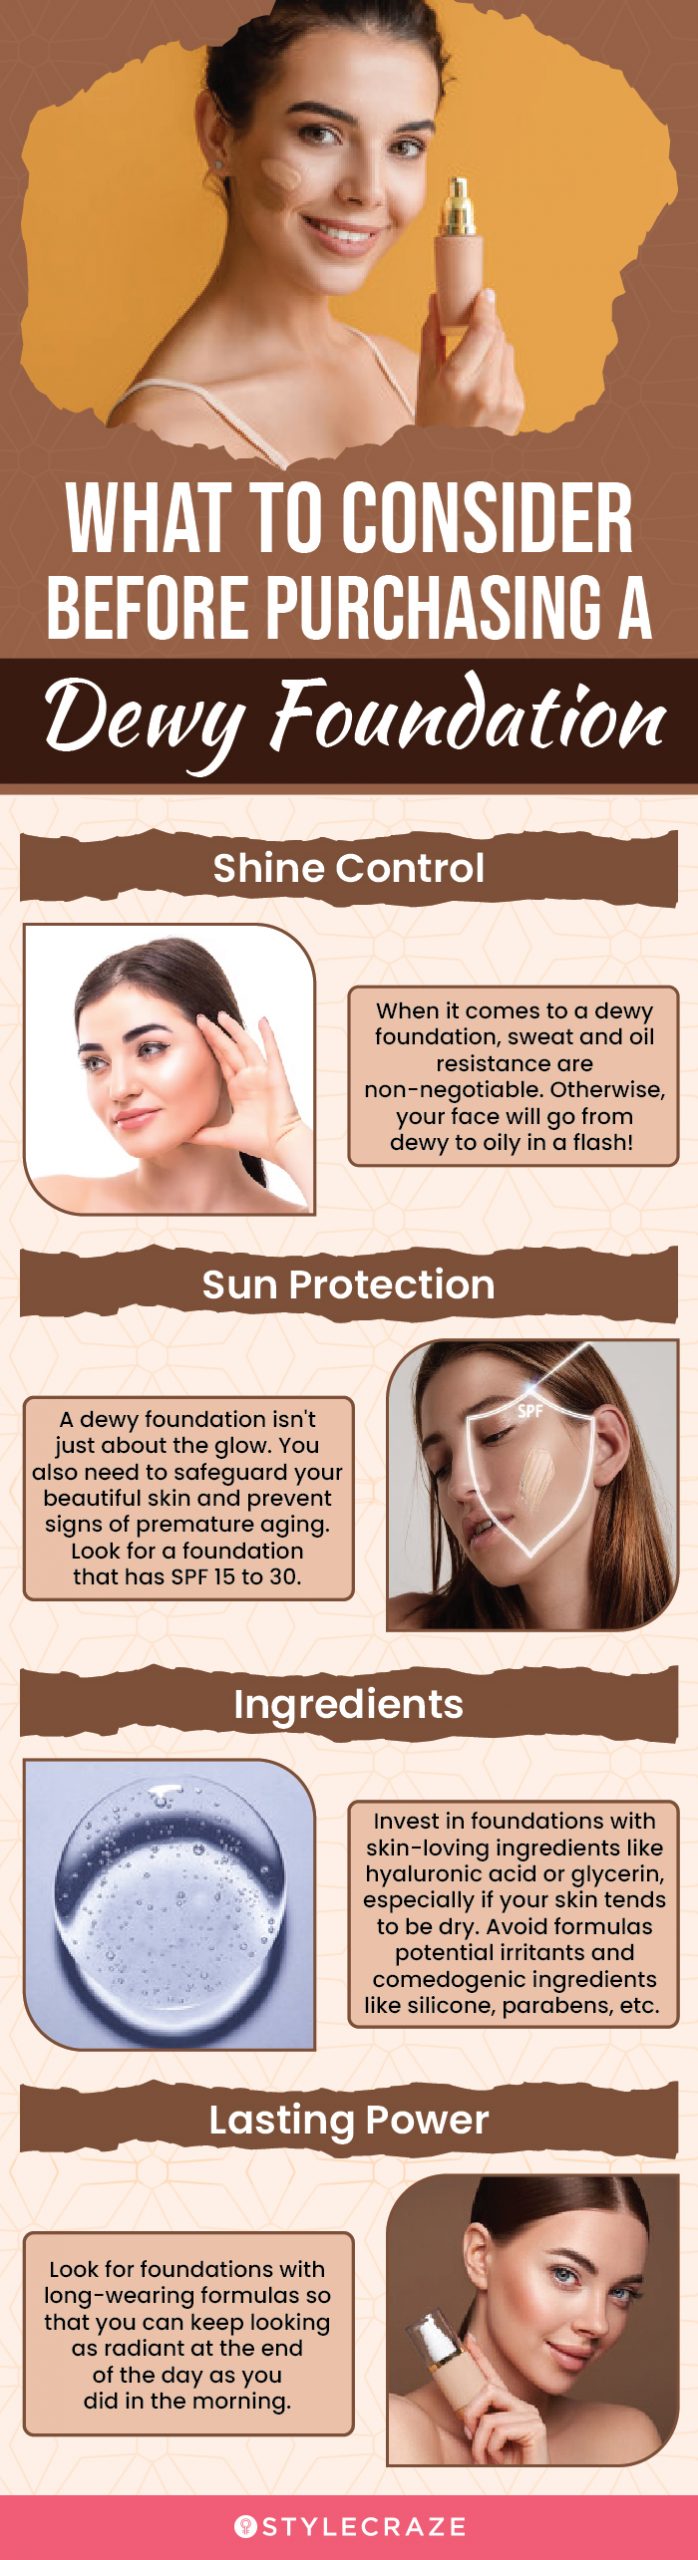 What To Consider Before Purchasing A Dewy Foundation (infographic)